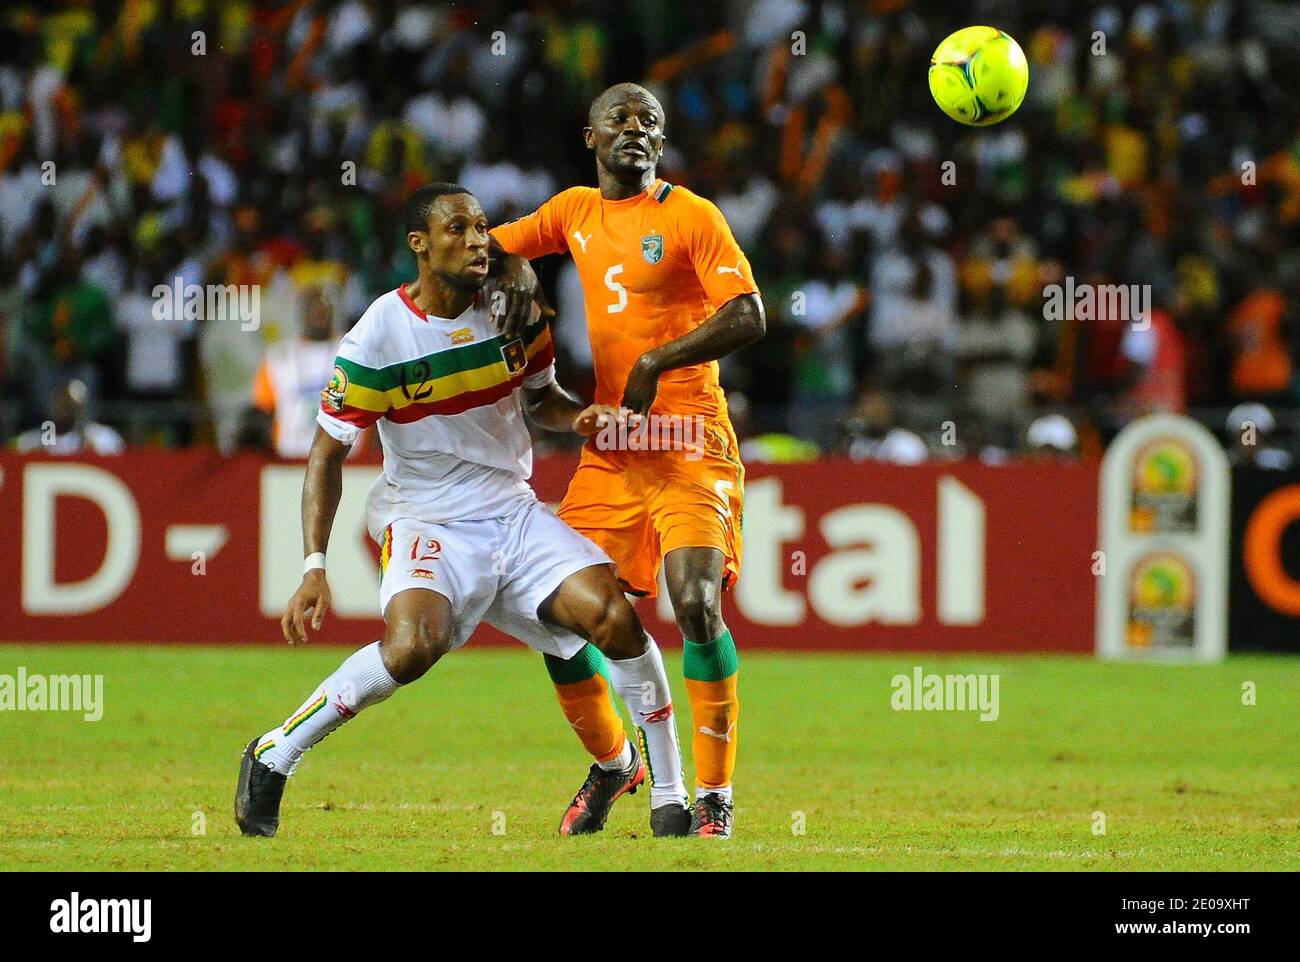 Mali's Seydou Keita and Ivory Coast's Didier Zokora during the 2012 African Cup of Nations, Semi-Final, Mali Vs Ivory Coast at the stade de l'amitie in Libreville, Gabon on February 8, 2012. Ivory Coast won 1-0. Photo by ABACXAPRESS.COM Stock Photo